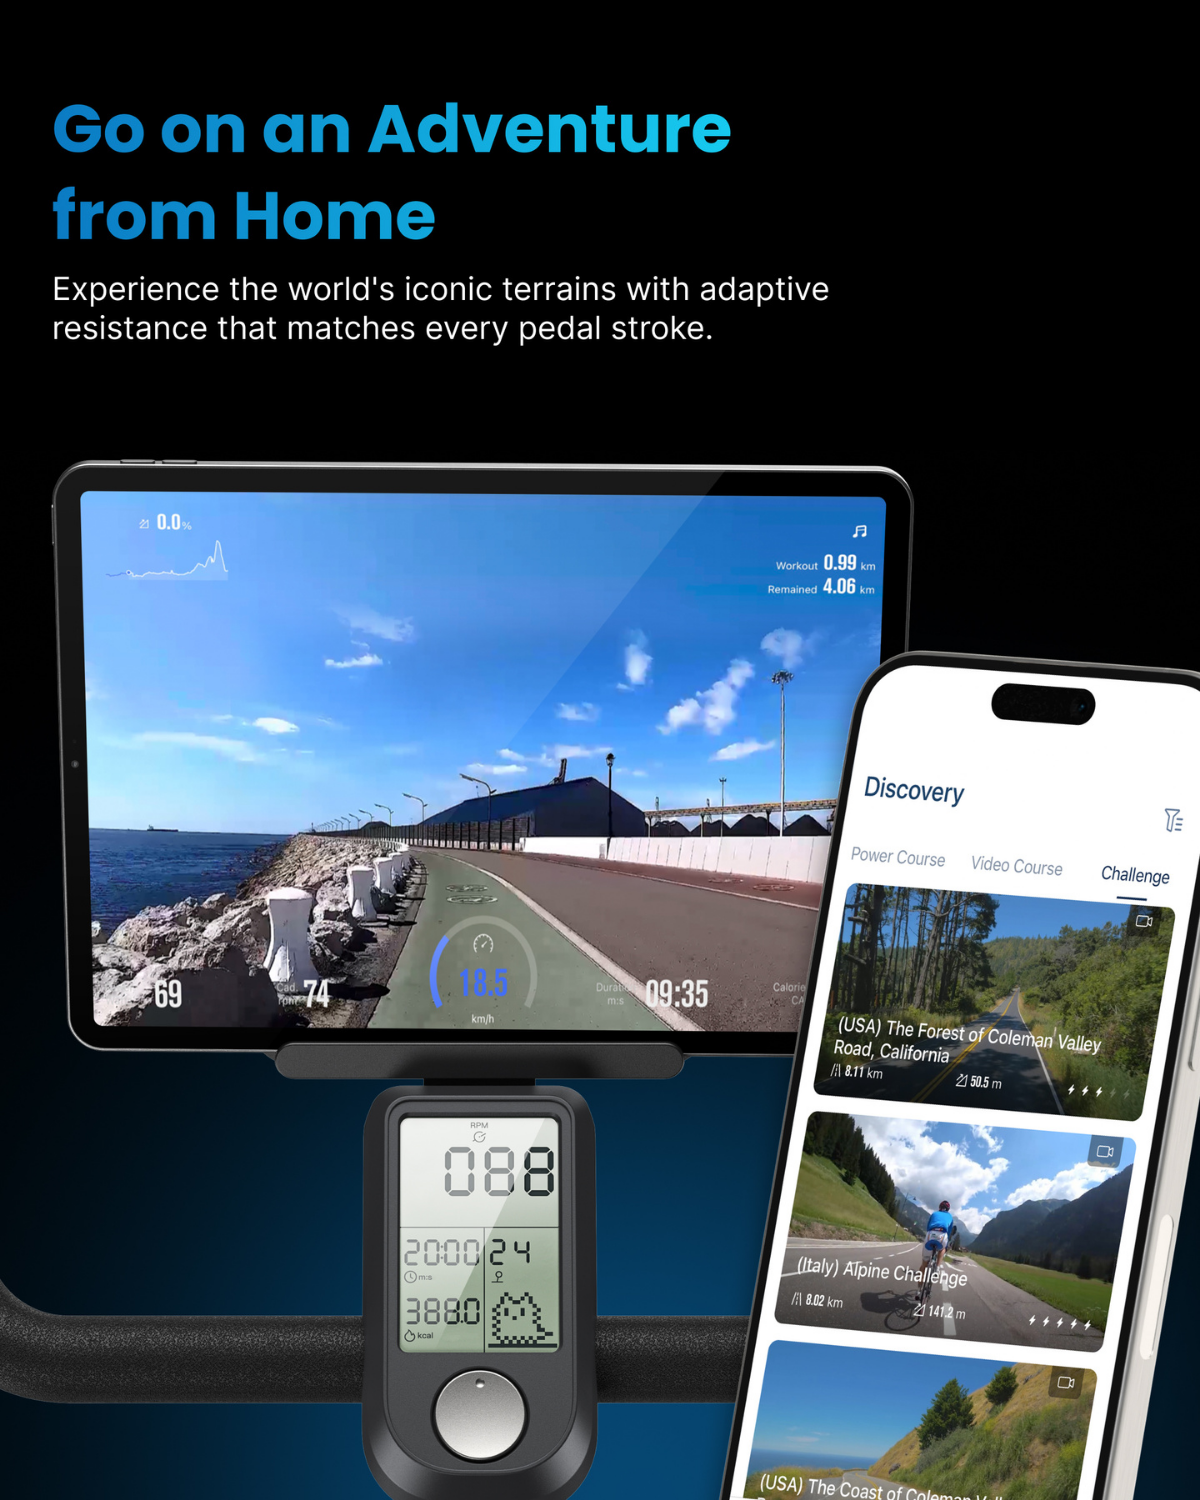 A promotional graphic for AI Smart Bike S by Renpho EU featuring a tablet and smartphone showing virtual cycling trails and wellness metrics, alongside a bike computer displaying ride data, set against a dark background with the text "go on an